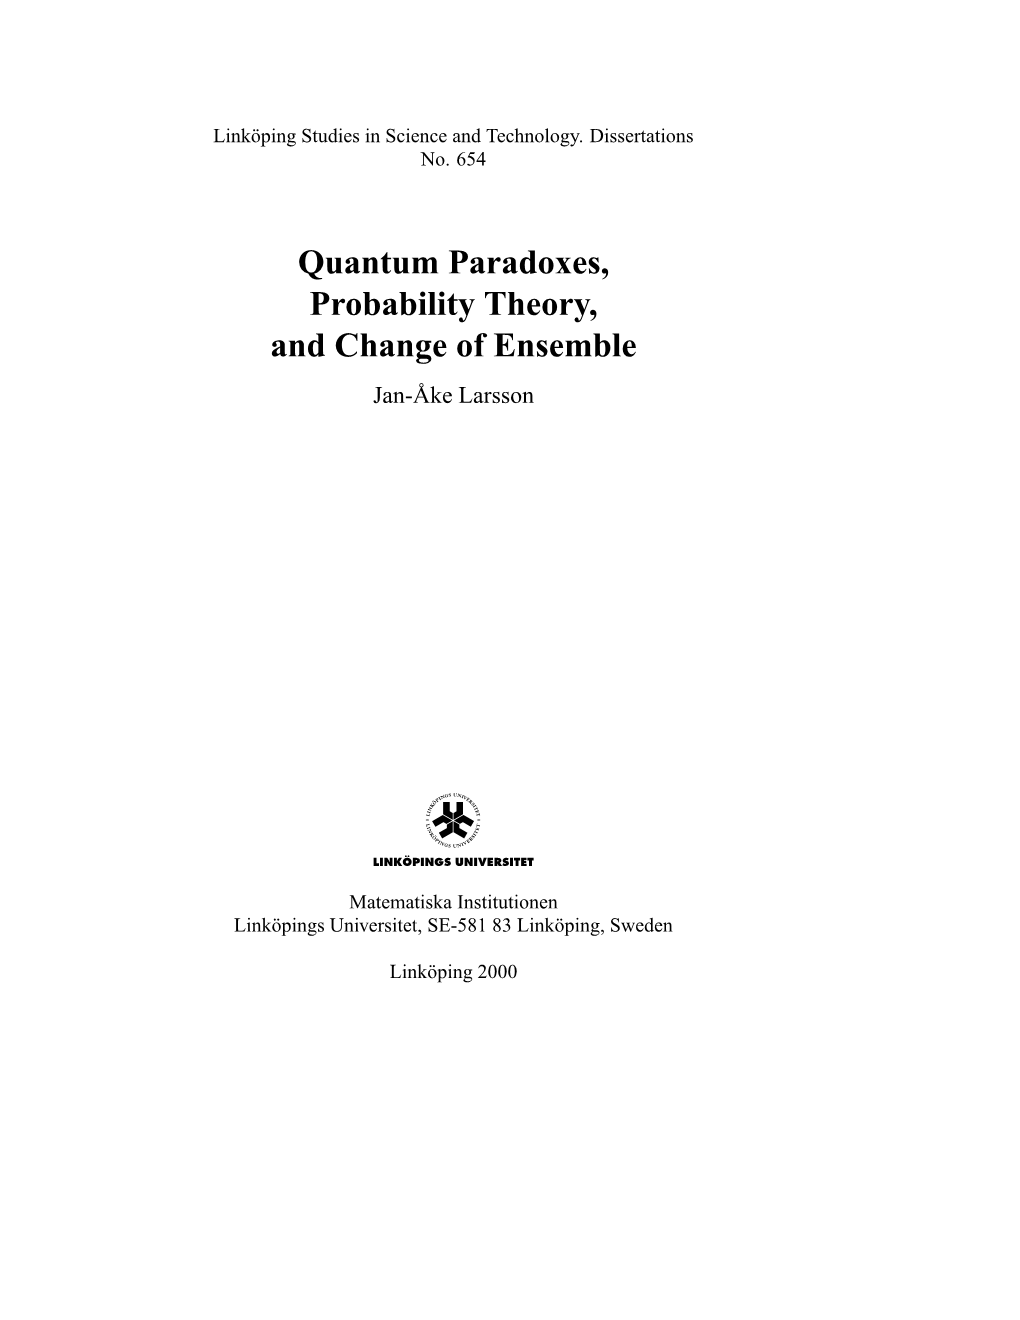 Quantum Paradoxes, Probability Theory, and Change of Ensemble Jan-Åke Larsson